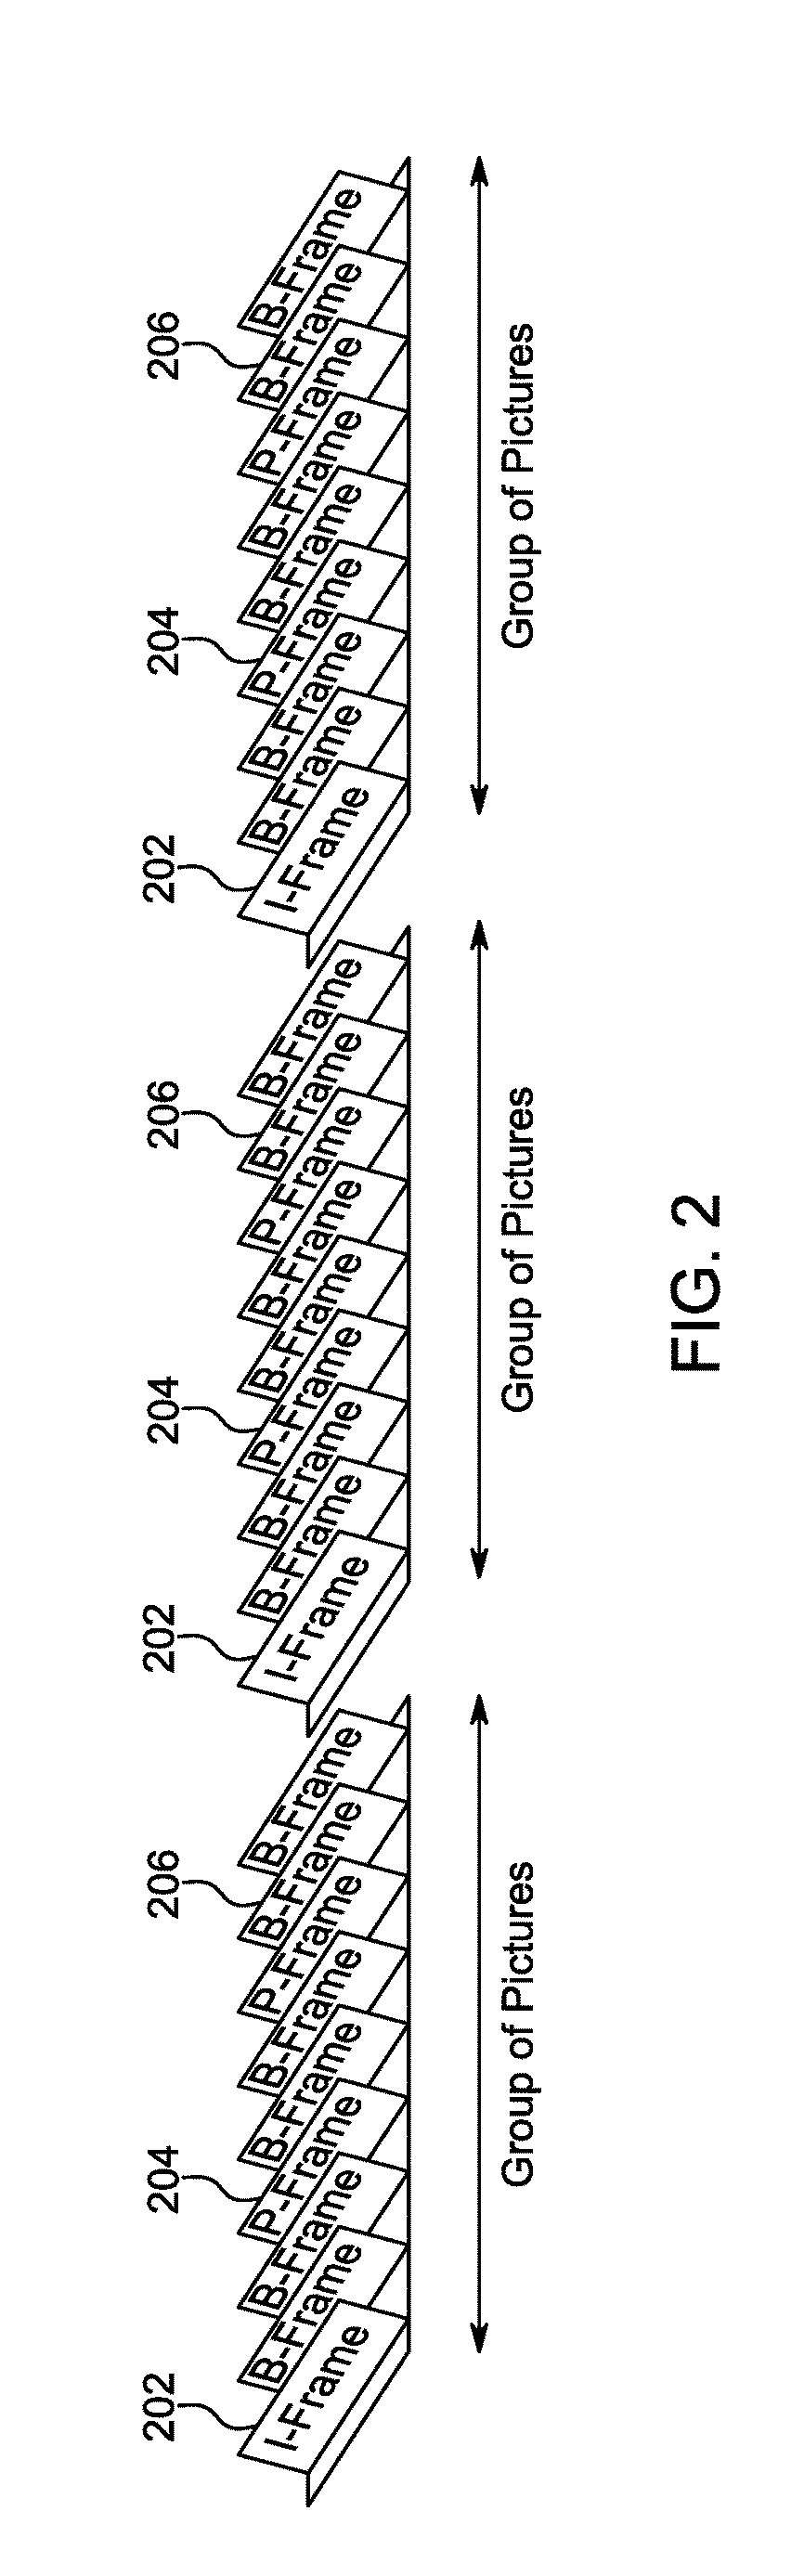 Systems and methods for motion estimation for coding a video sequence